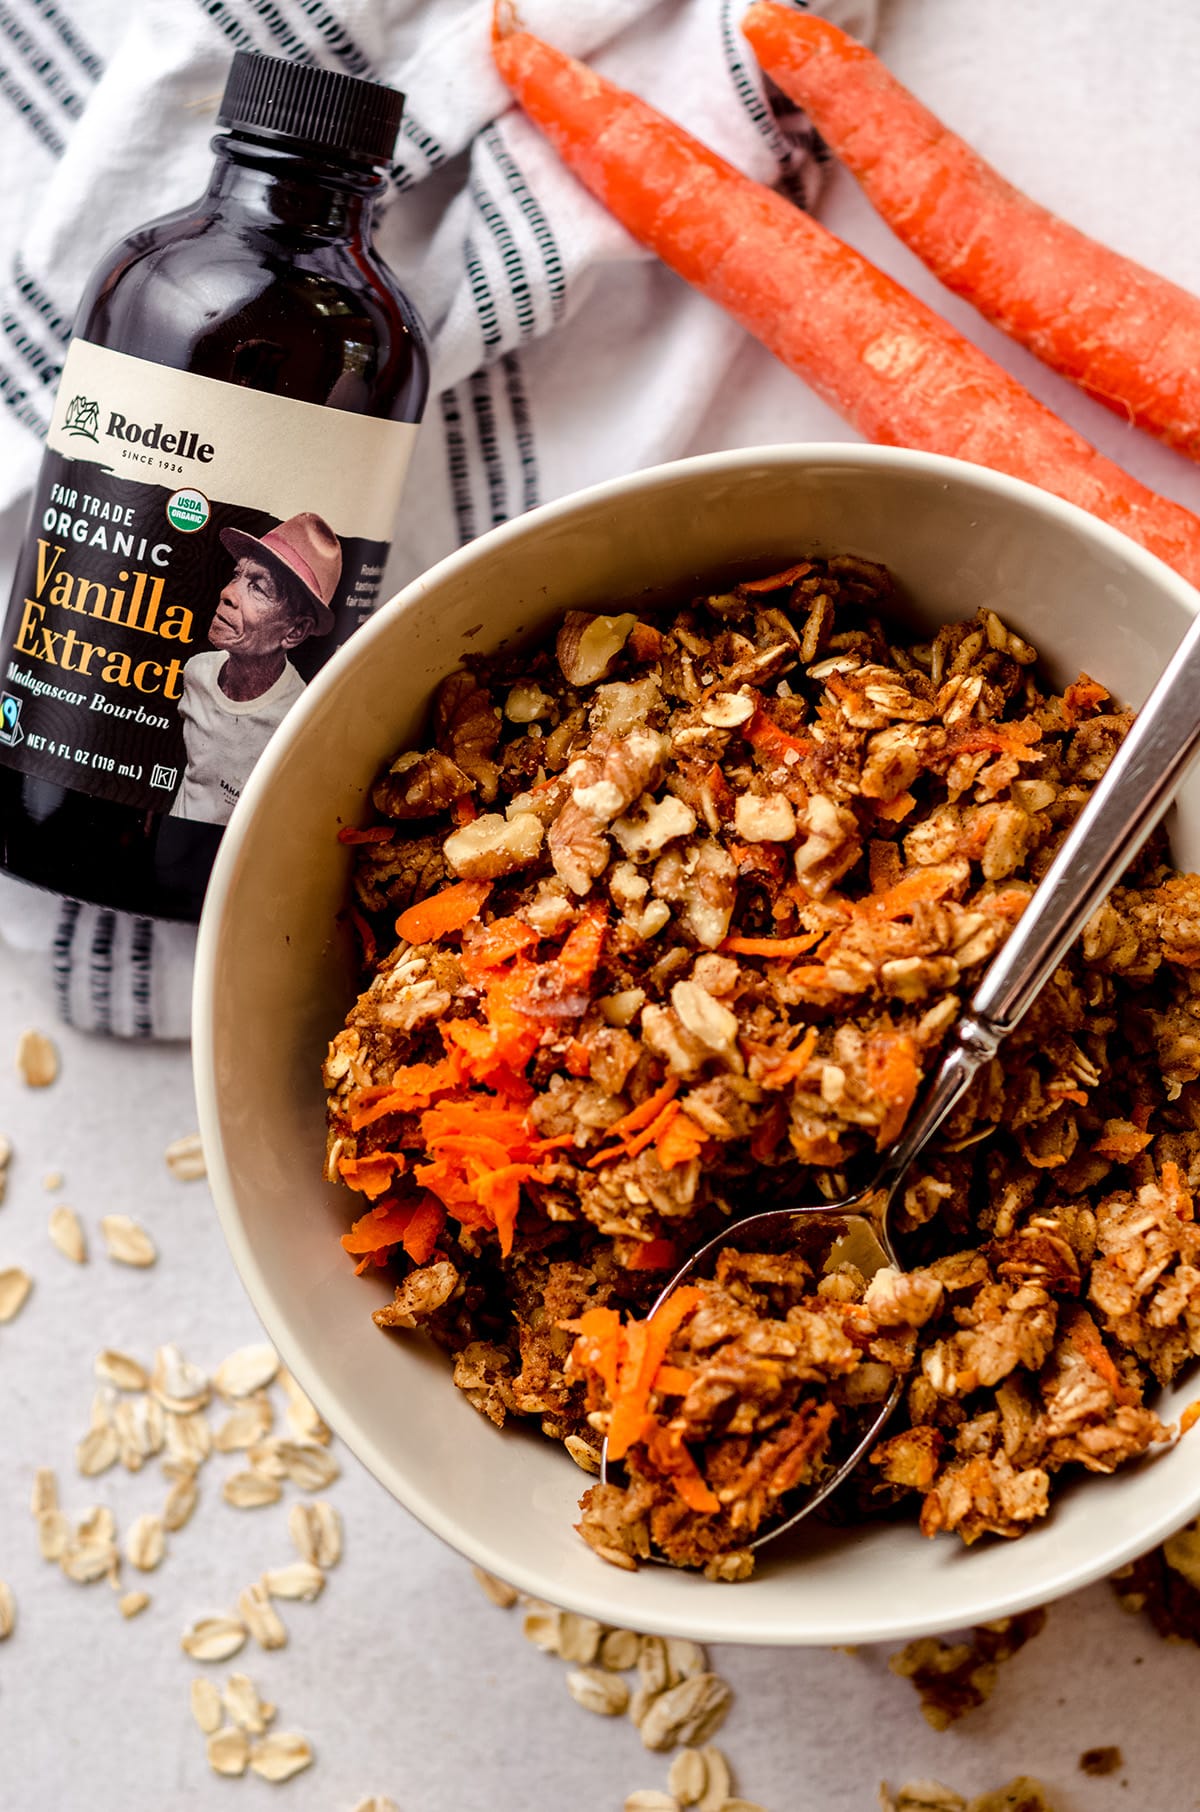 carrot cake baked oatmeal in a bowl with a spoon and a bottle of rodelle fair trade vanilla extract in the background